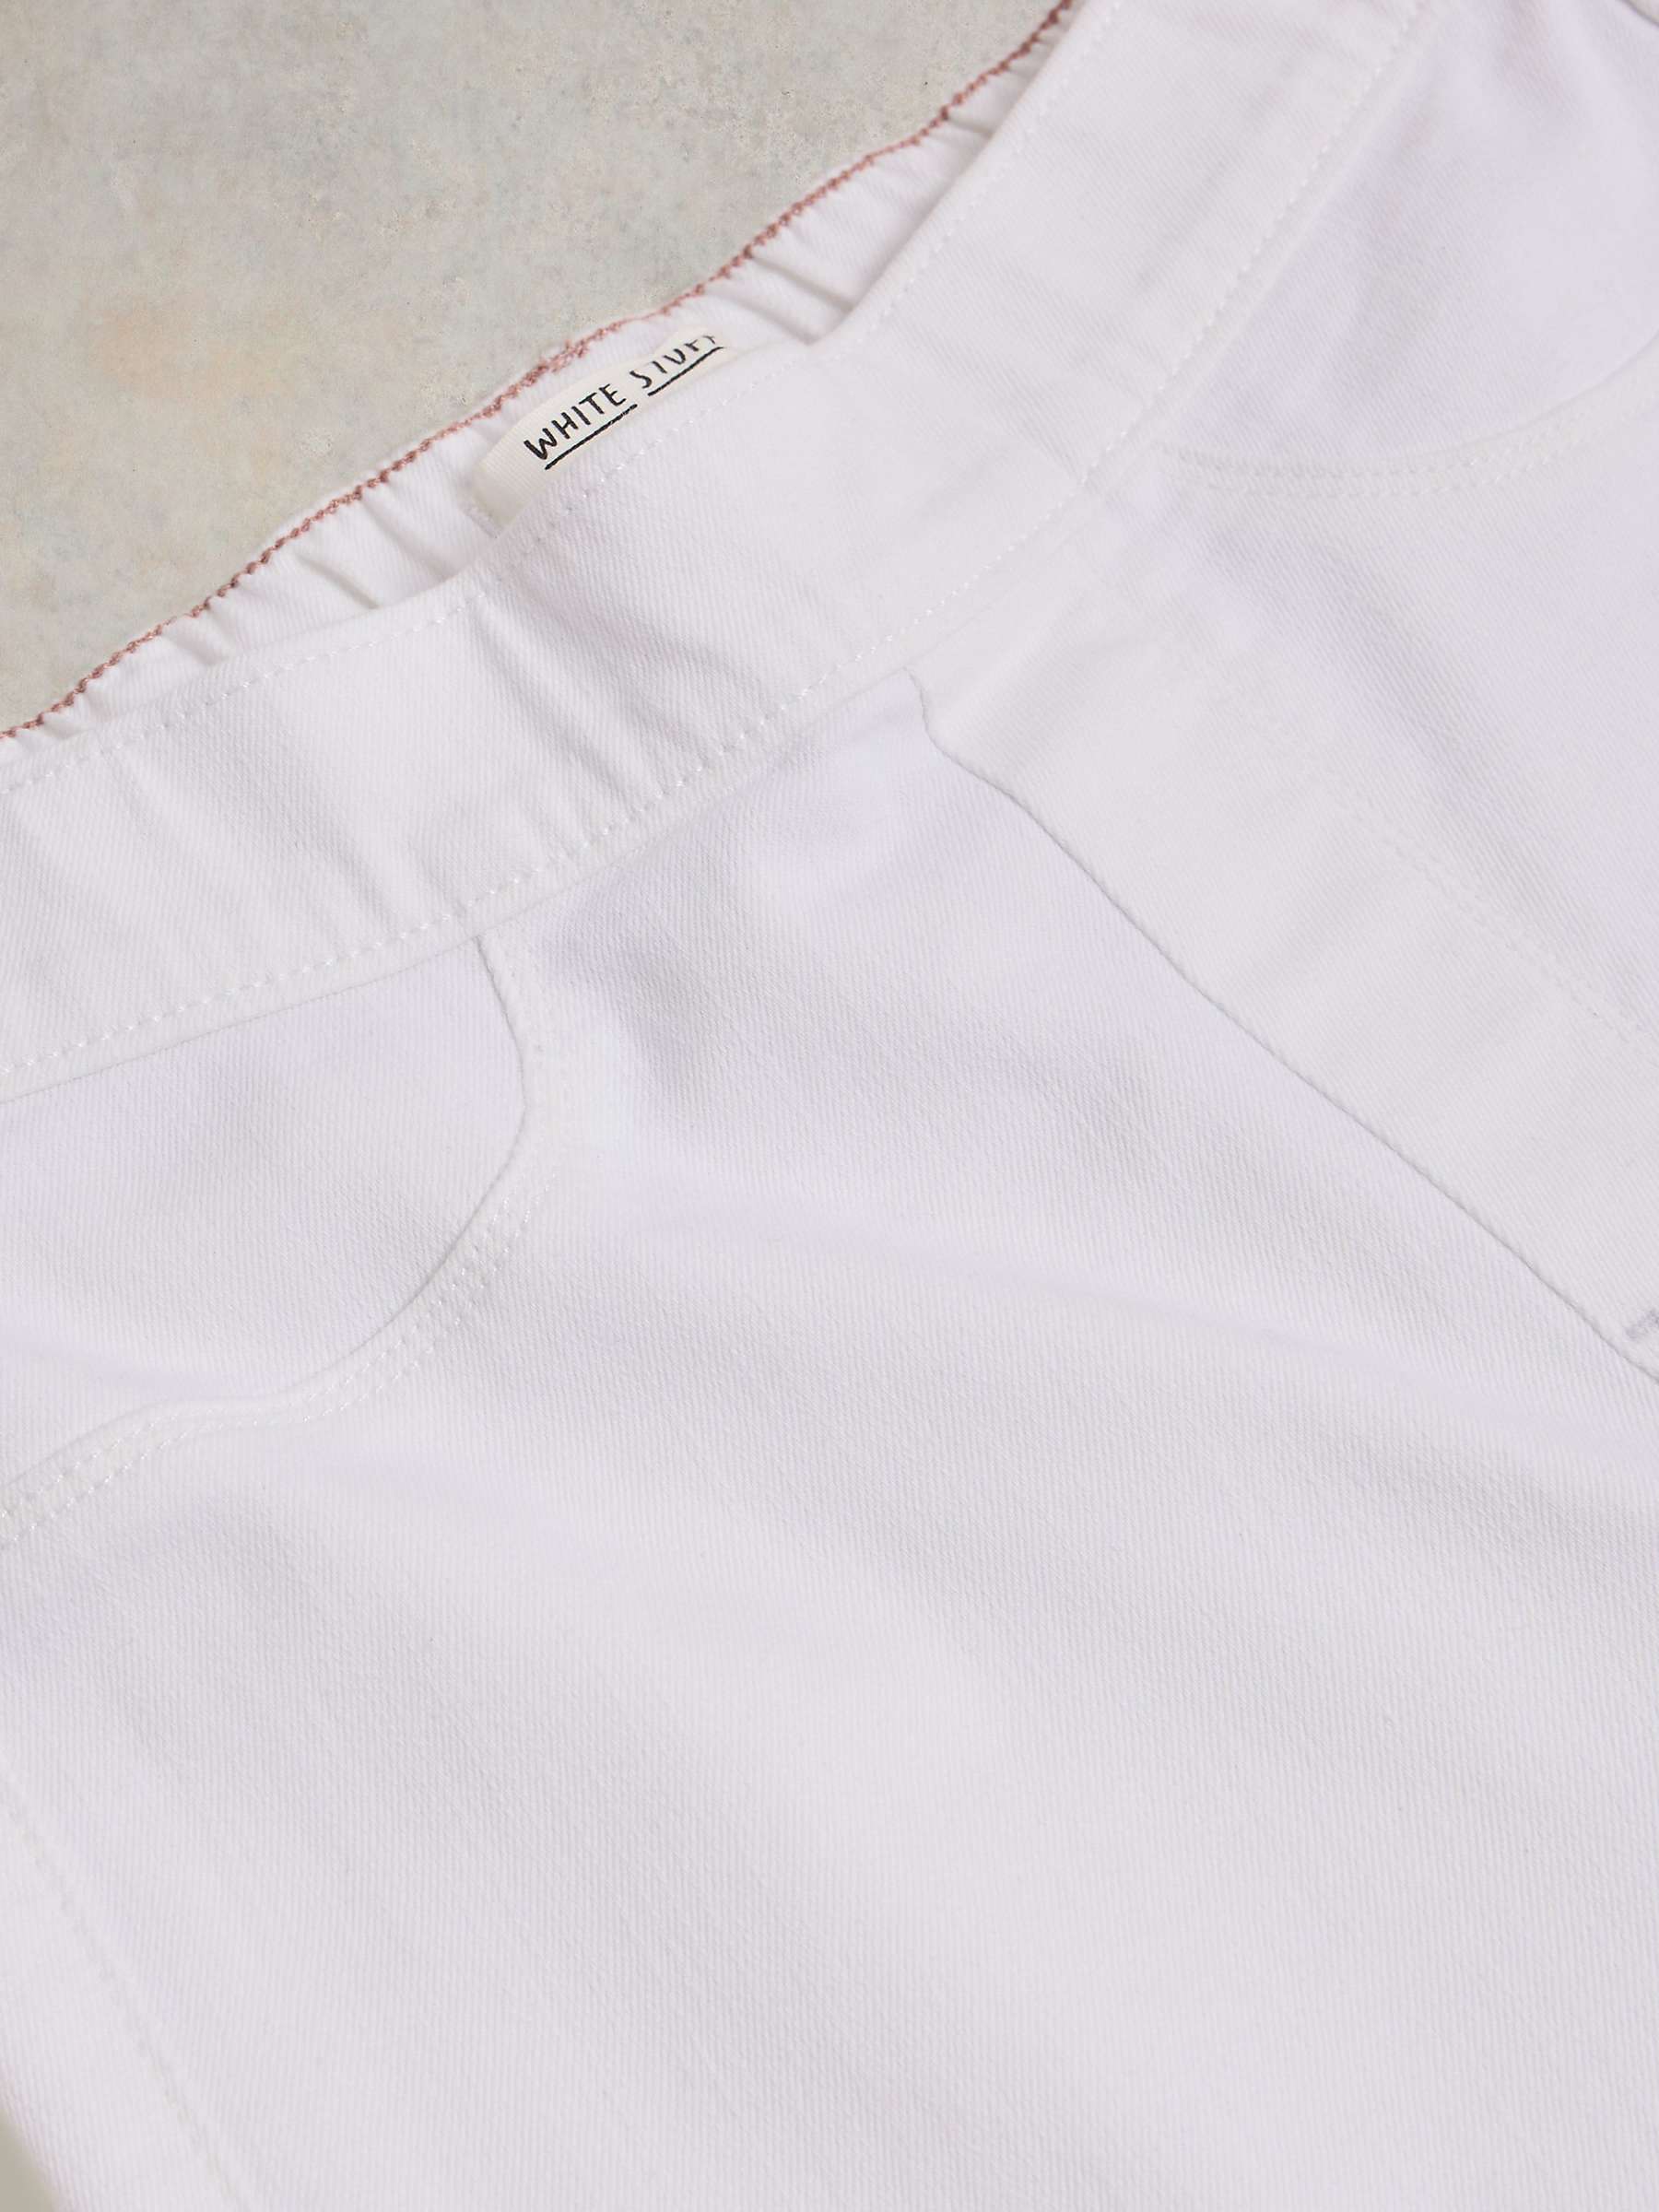 Buy White Stuff Cropped Janey Jeggings, Natural White Online at johnlewis.com